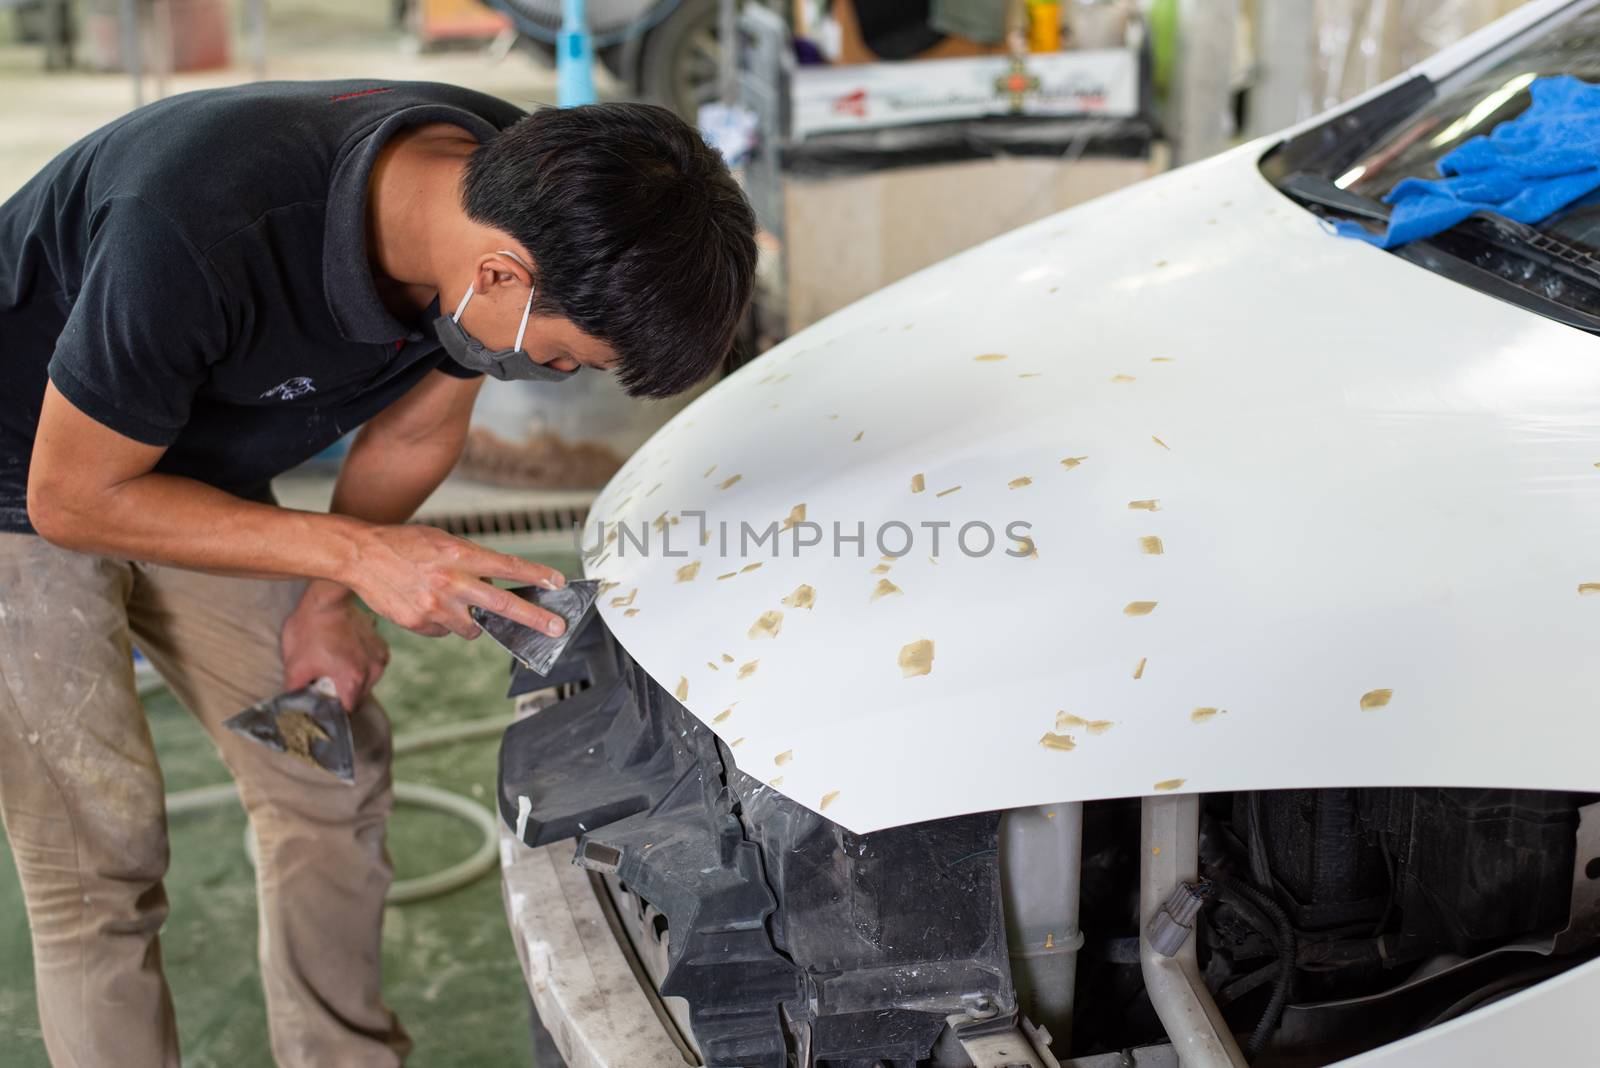 Bangkok, Thailand - August 31, 2017 : Unidentified denter or car mechanic serviceman check and fix body work and fiber bumper body part for fix and repair problem at car garage or repair shop